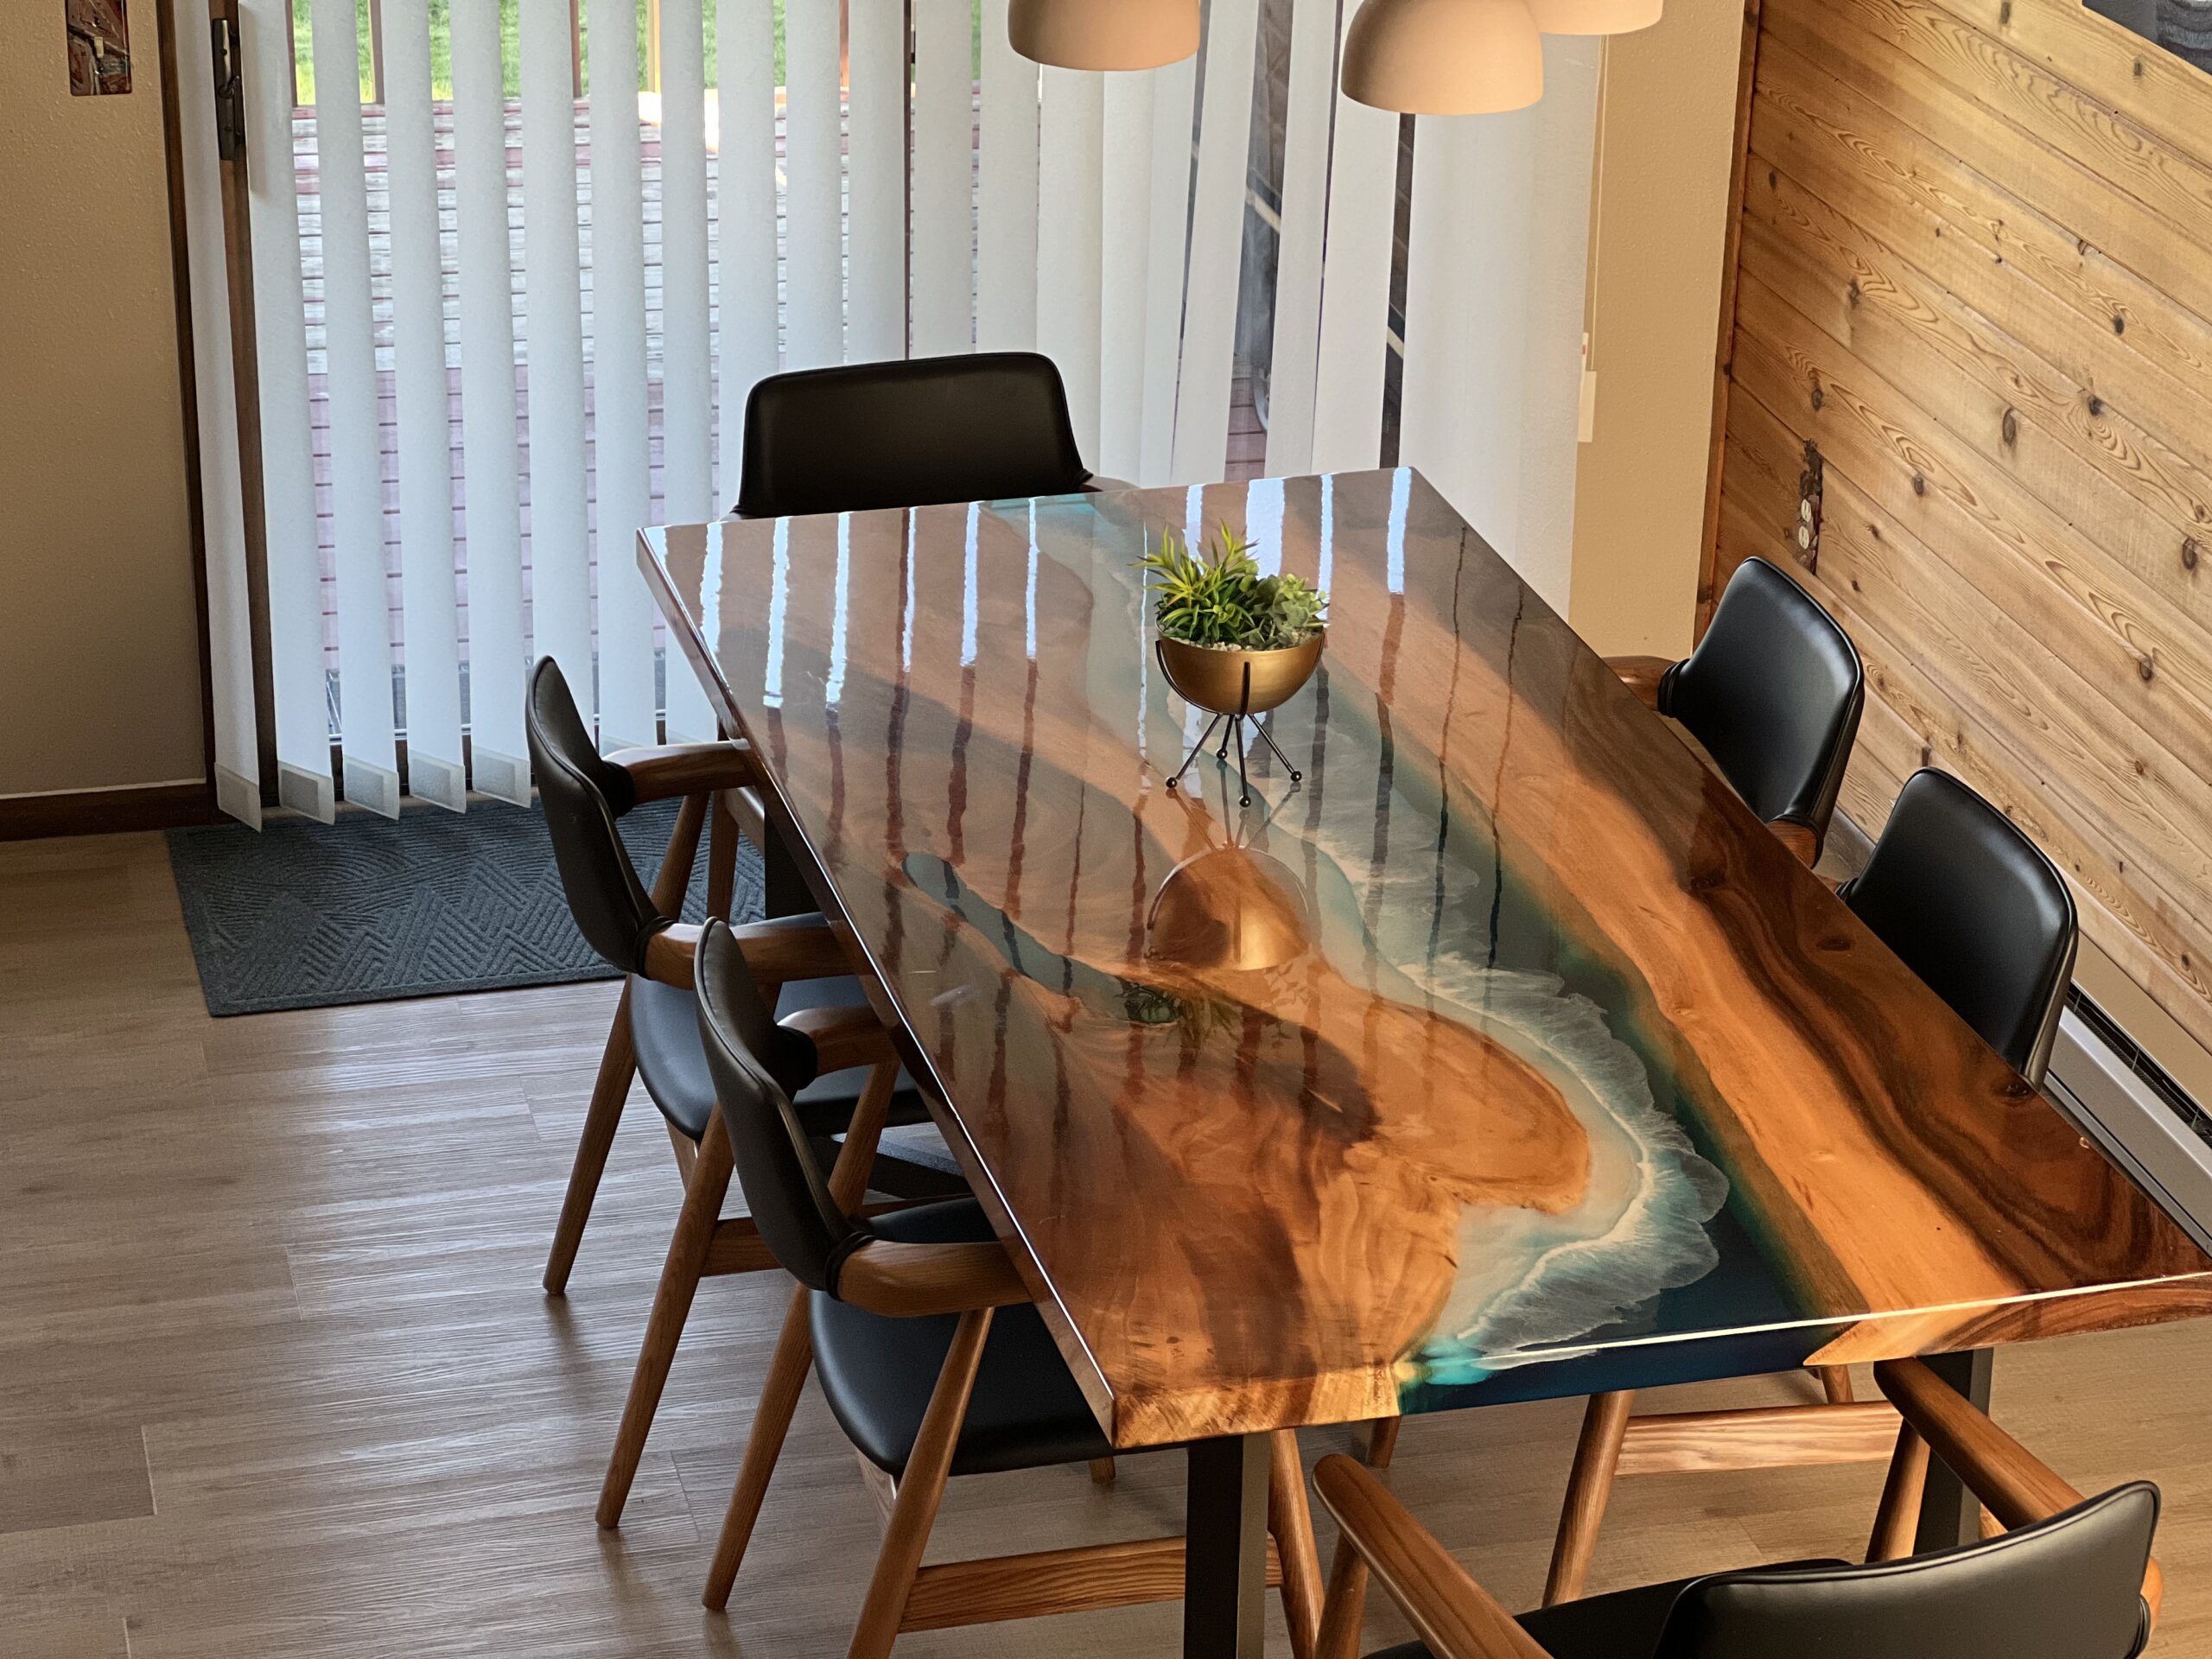 Stunning dining room table at West Glacier Vista. The location is perfect and the mountain range is superb to wake up to. Book at Whitefish Glacier Vacations when you’re ready to pick a great place to stay near West Glacier in Montana